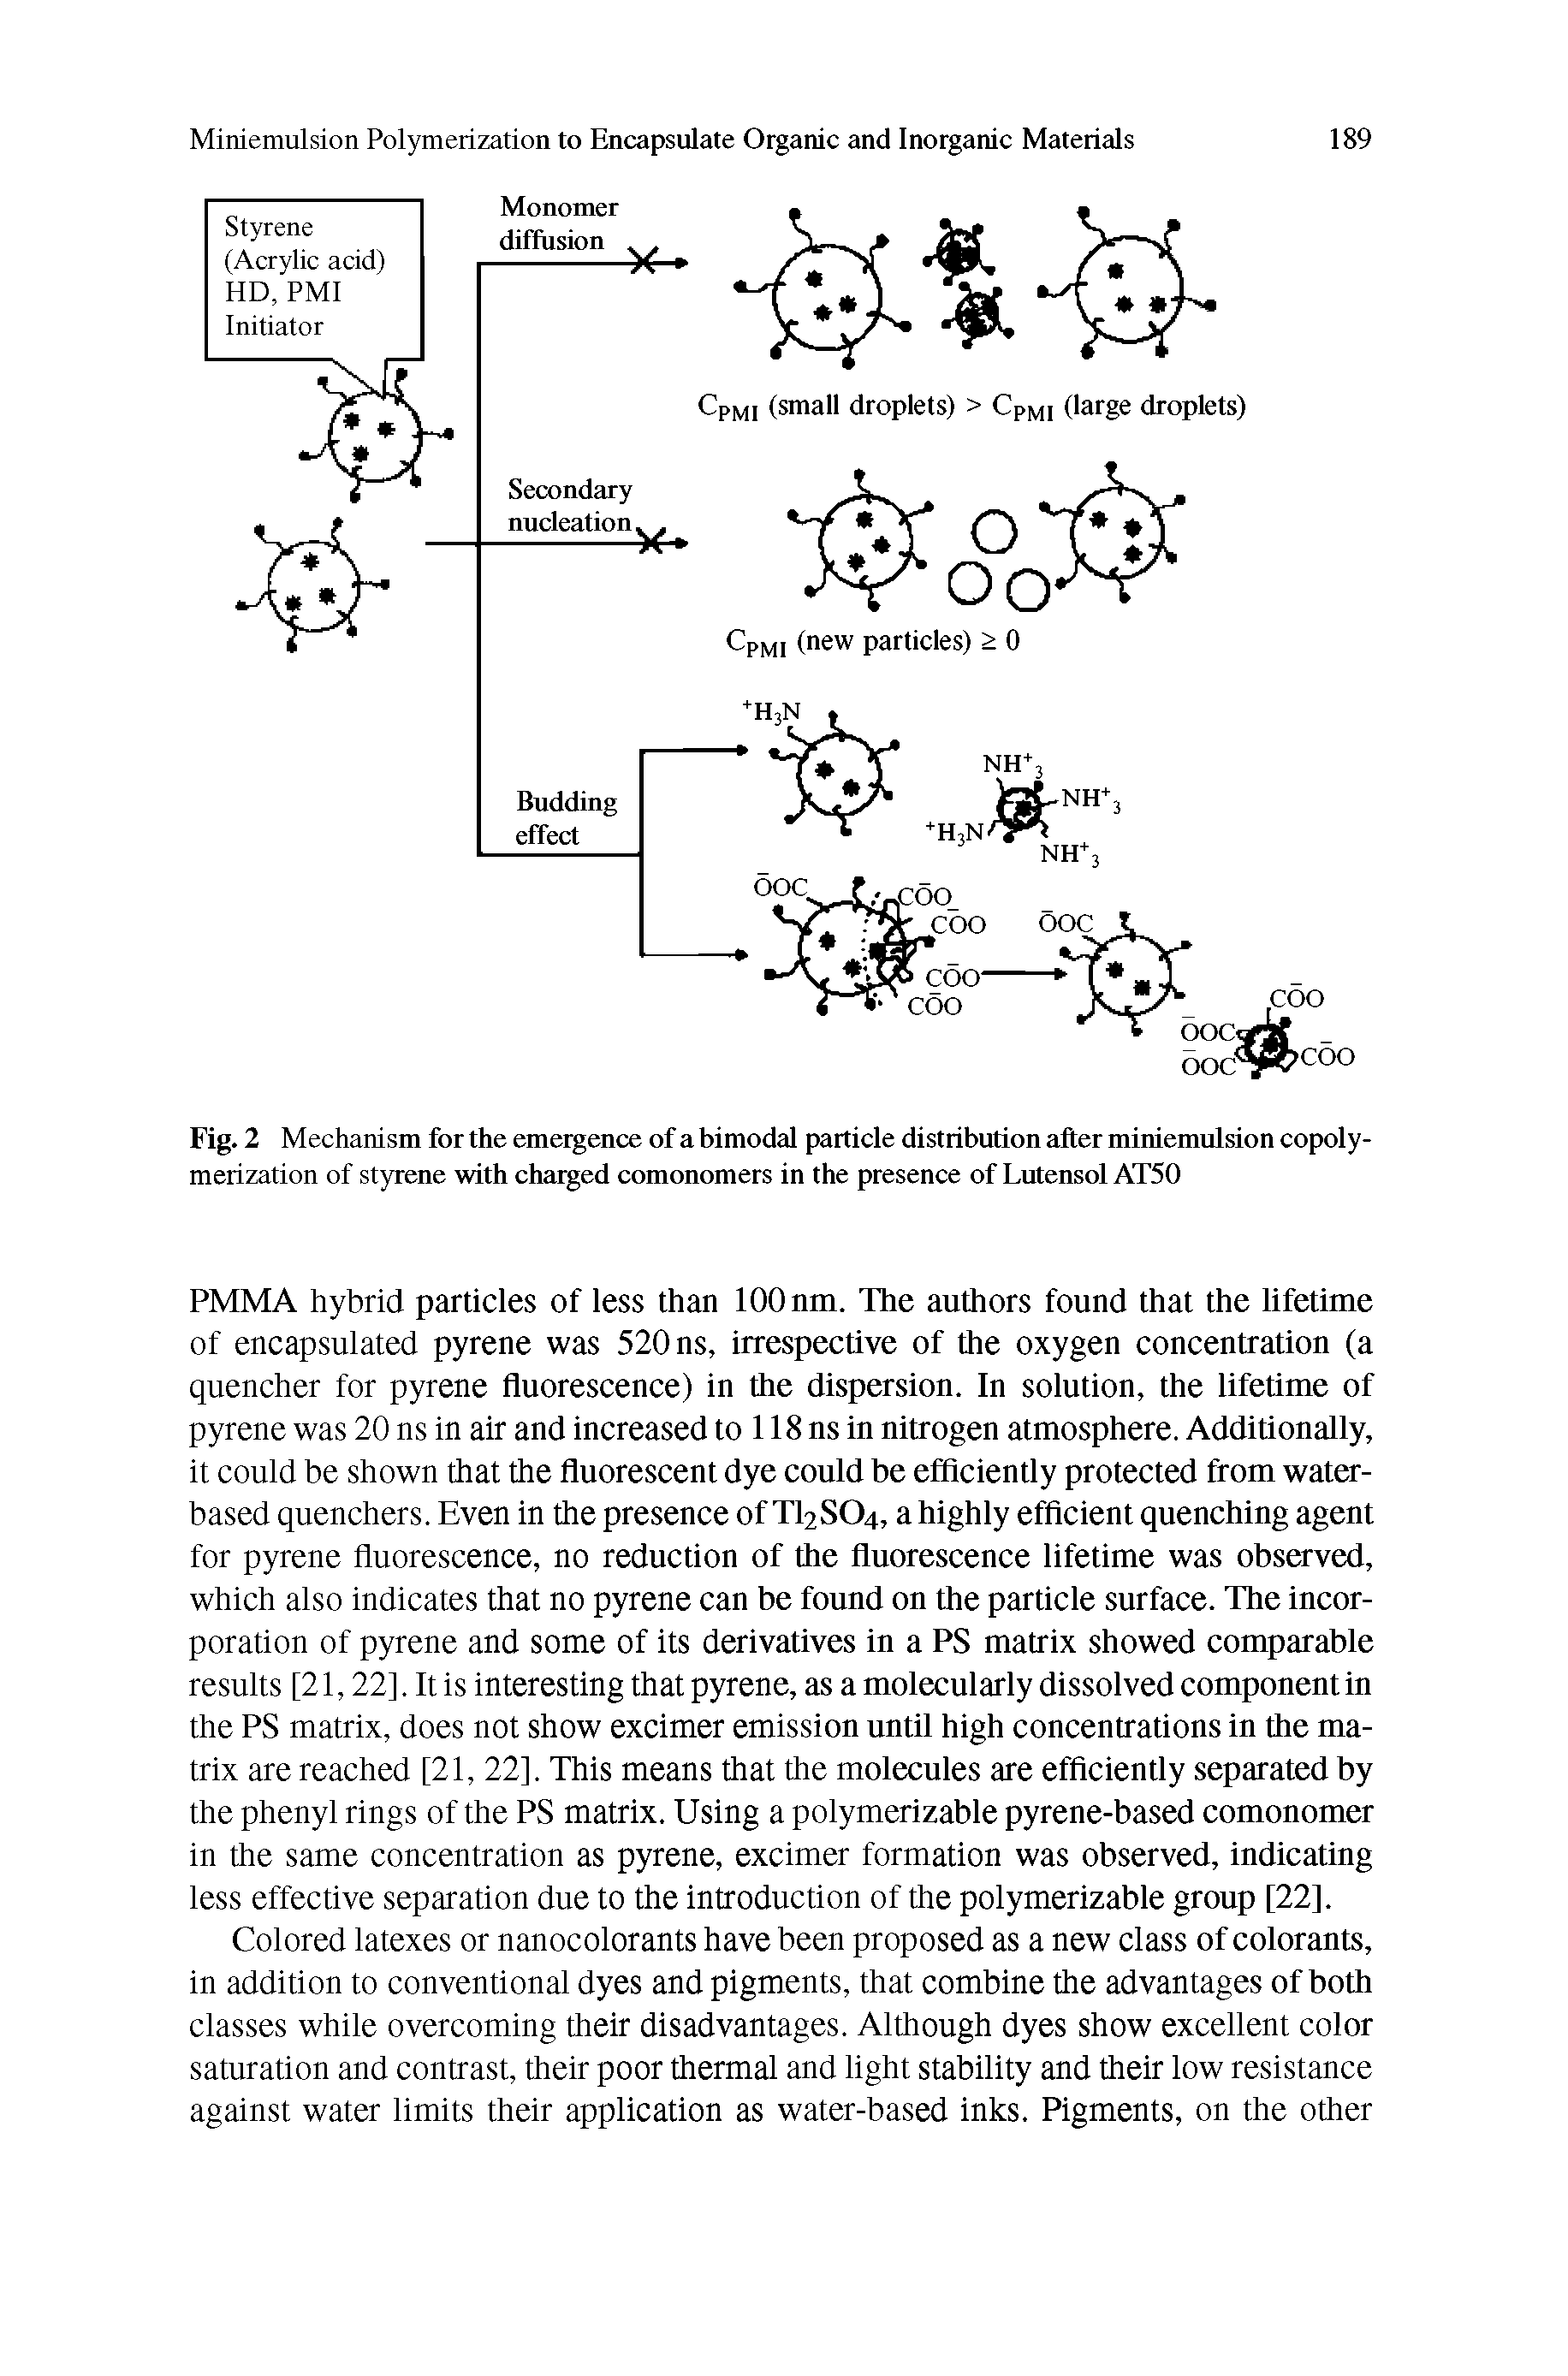 Fig. 2 Mechanism for the emergence of a bimodal particle distribution after miniemulsion copolymerization of styrene with charged comonomers in the presence of Lutensol AT50...